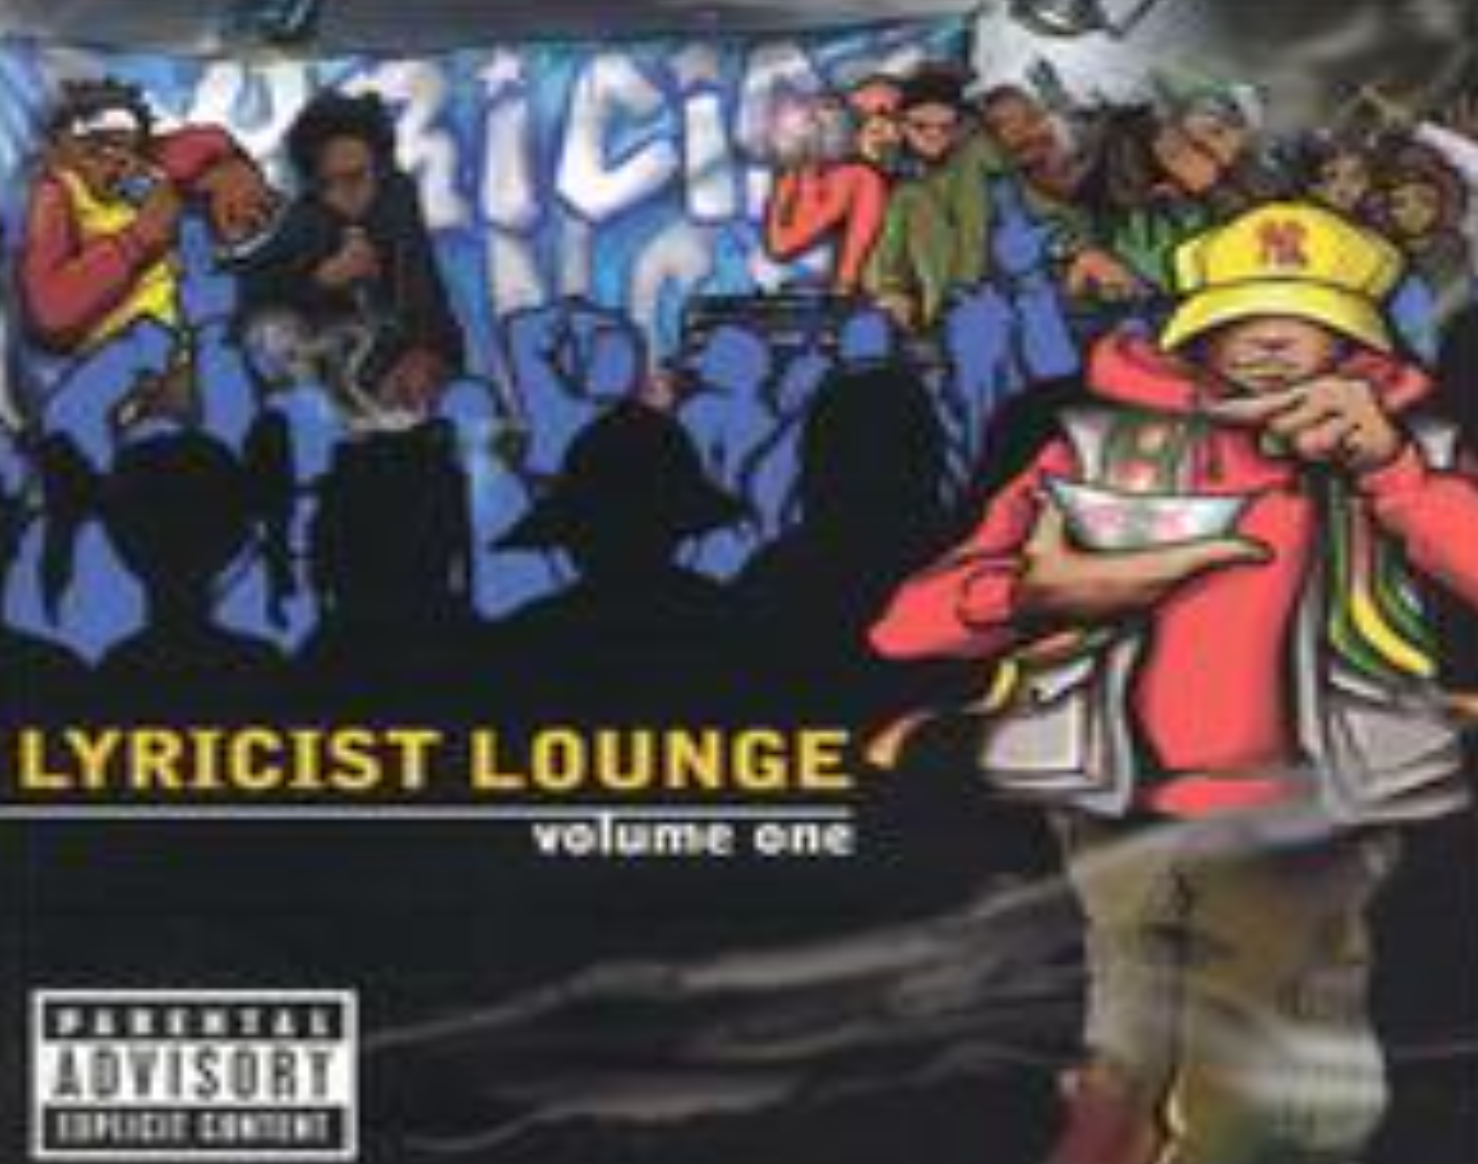 TODAY IN HIP HOP HISTORY: RAWKUS RECORDS RELEASED THE ‘LYRICIST LOUNGE VOLUME ONE’ ALBUM 26 YEARS AGO